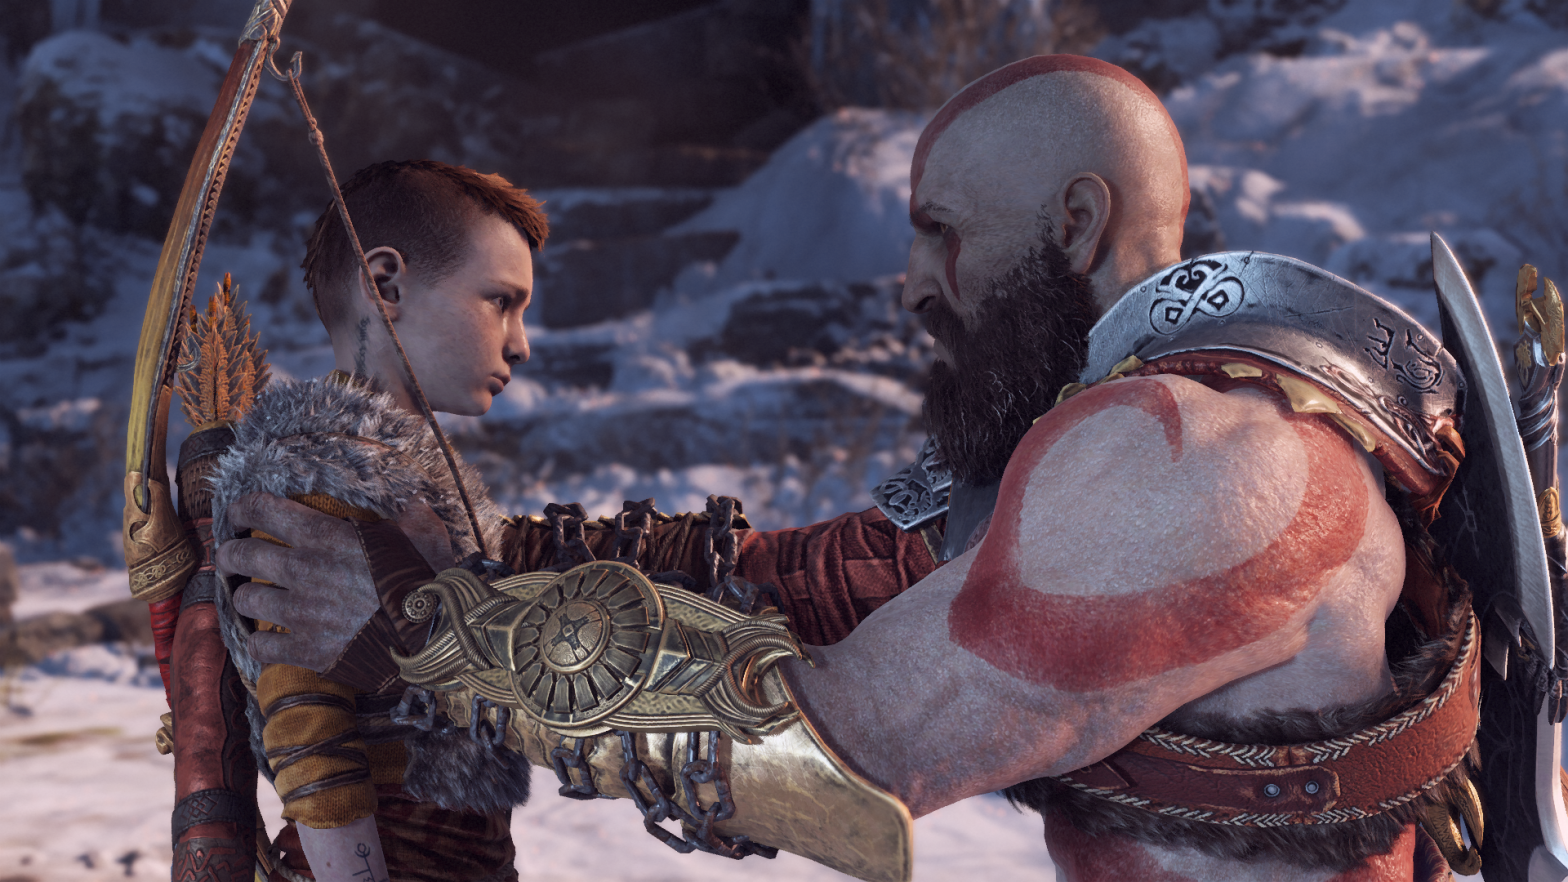 God of War has one of the best dads in video game history